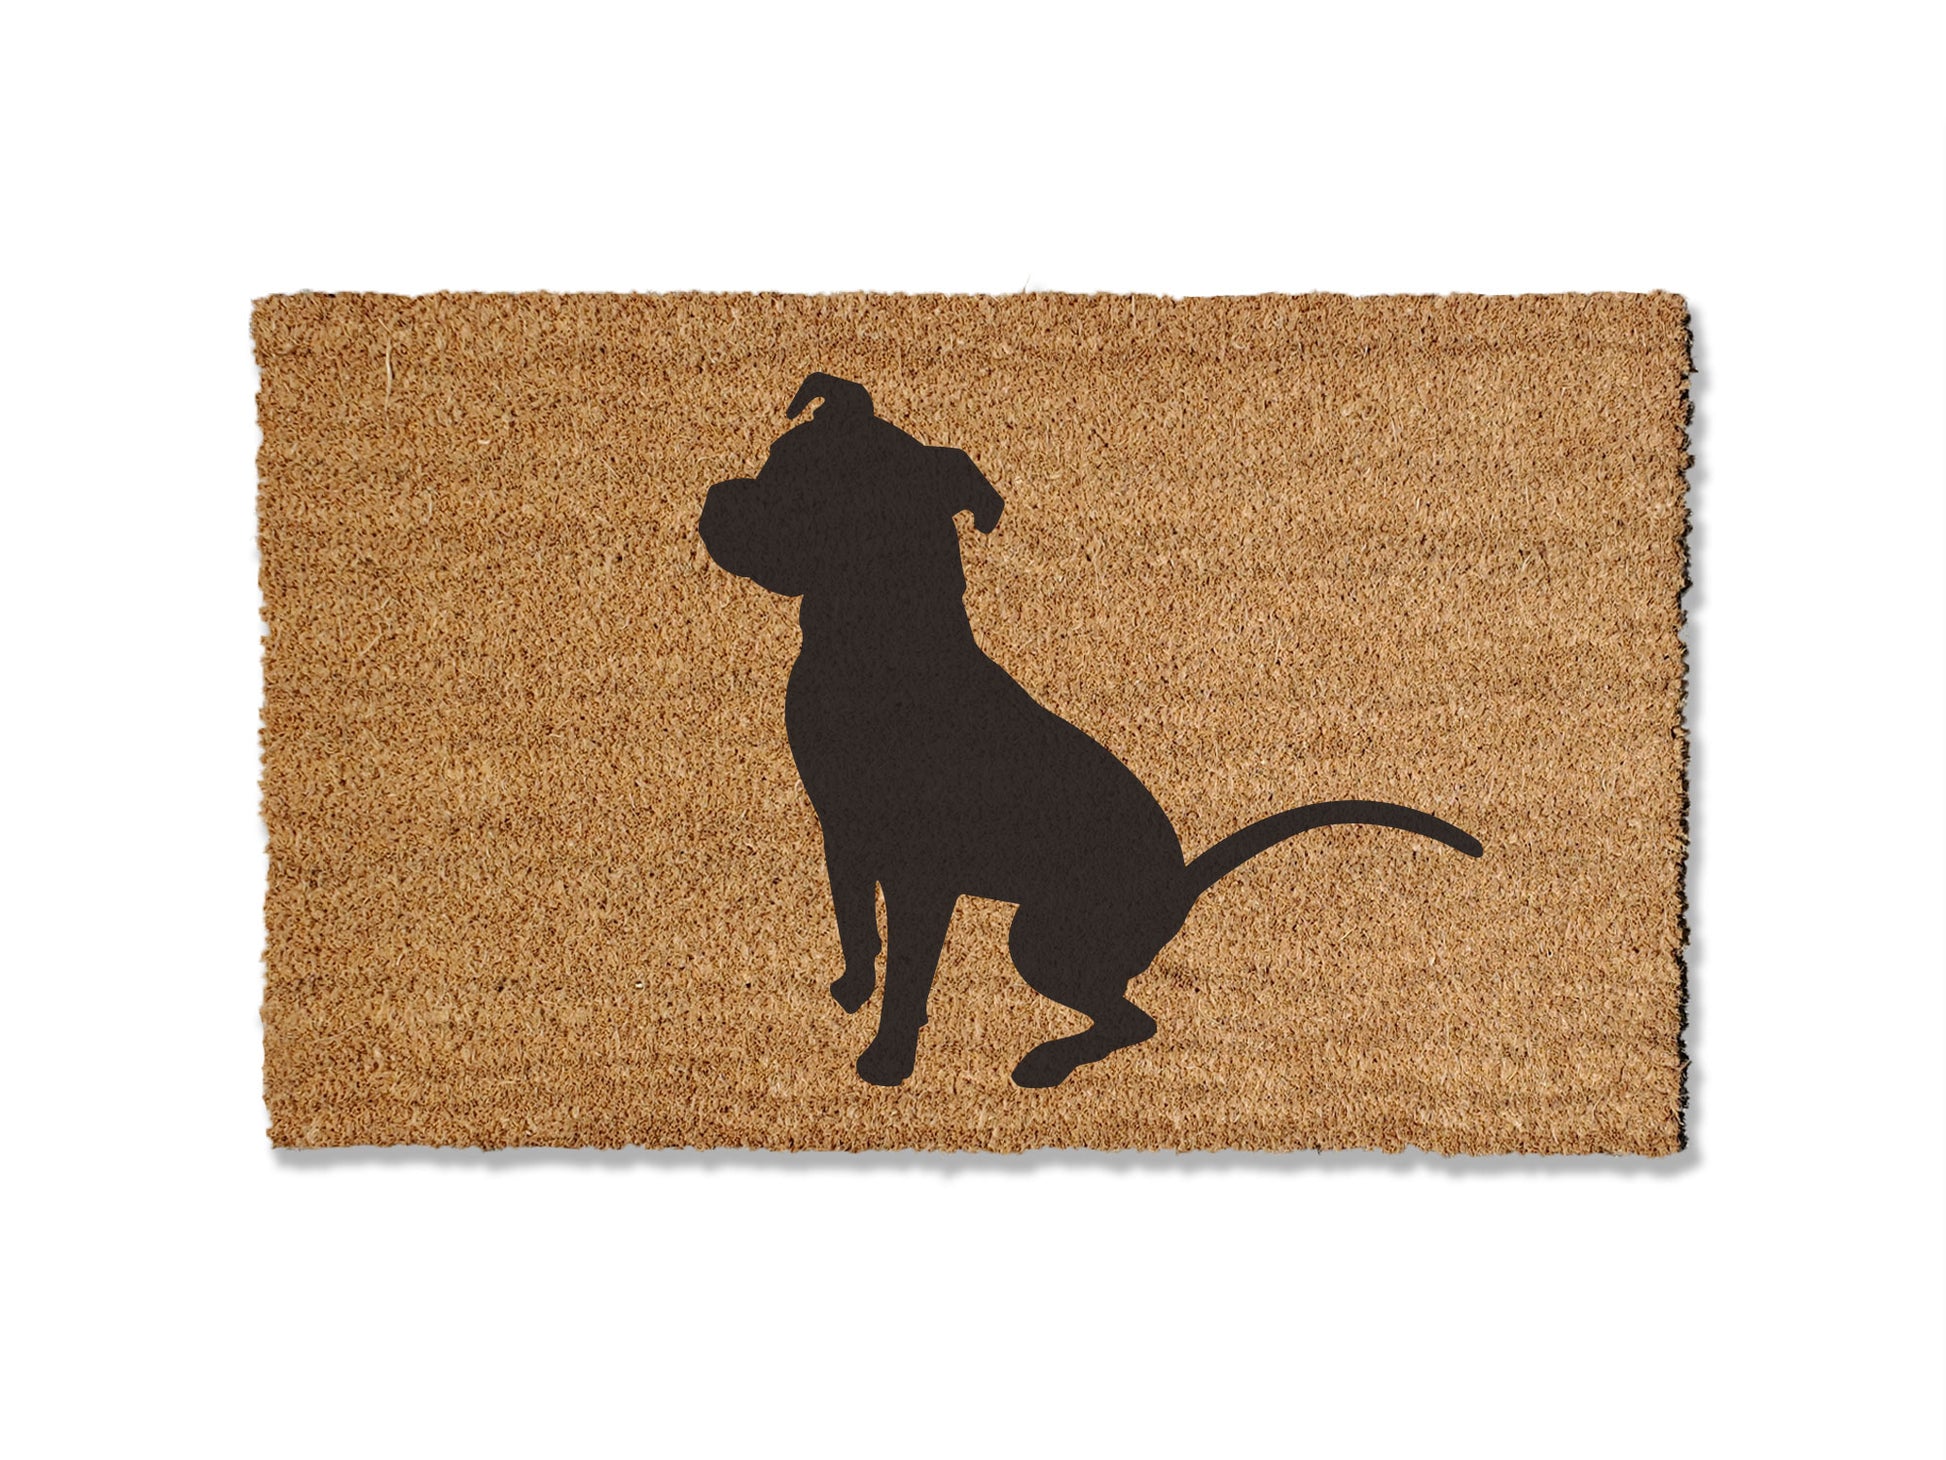 Coir doormat featuring an adorable pit bull design, ideal for dog lovers. This doormat is not only charming but also effective at trapping dirt. Available in multiple sizes to suit your entryway needs.